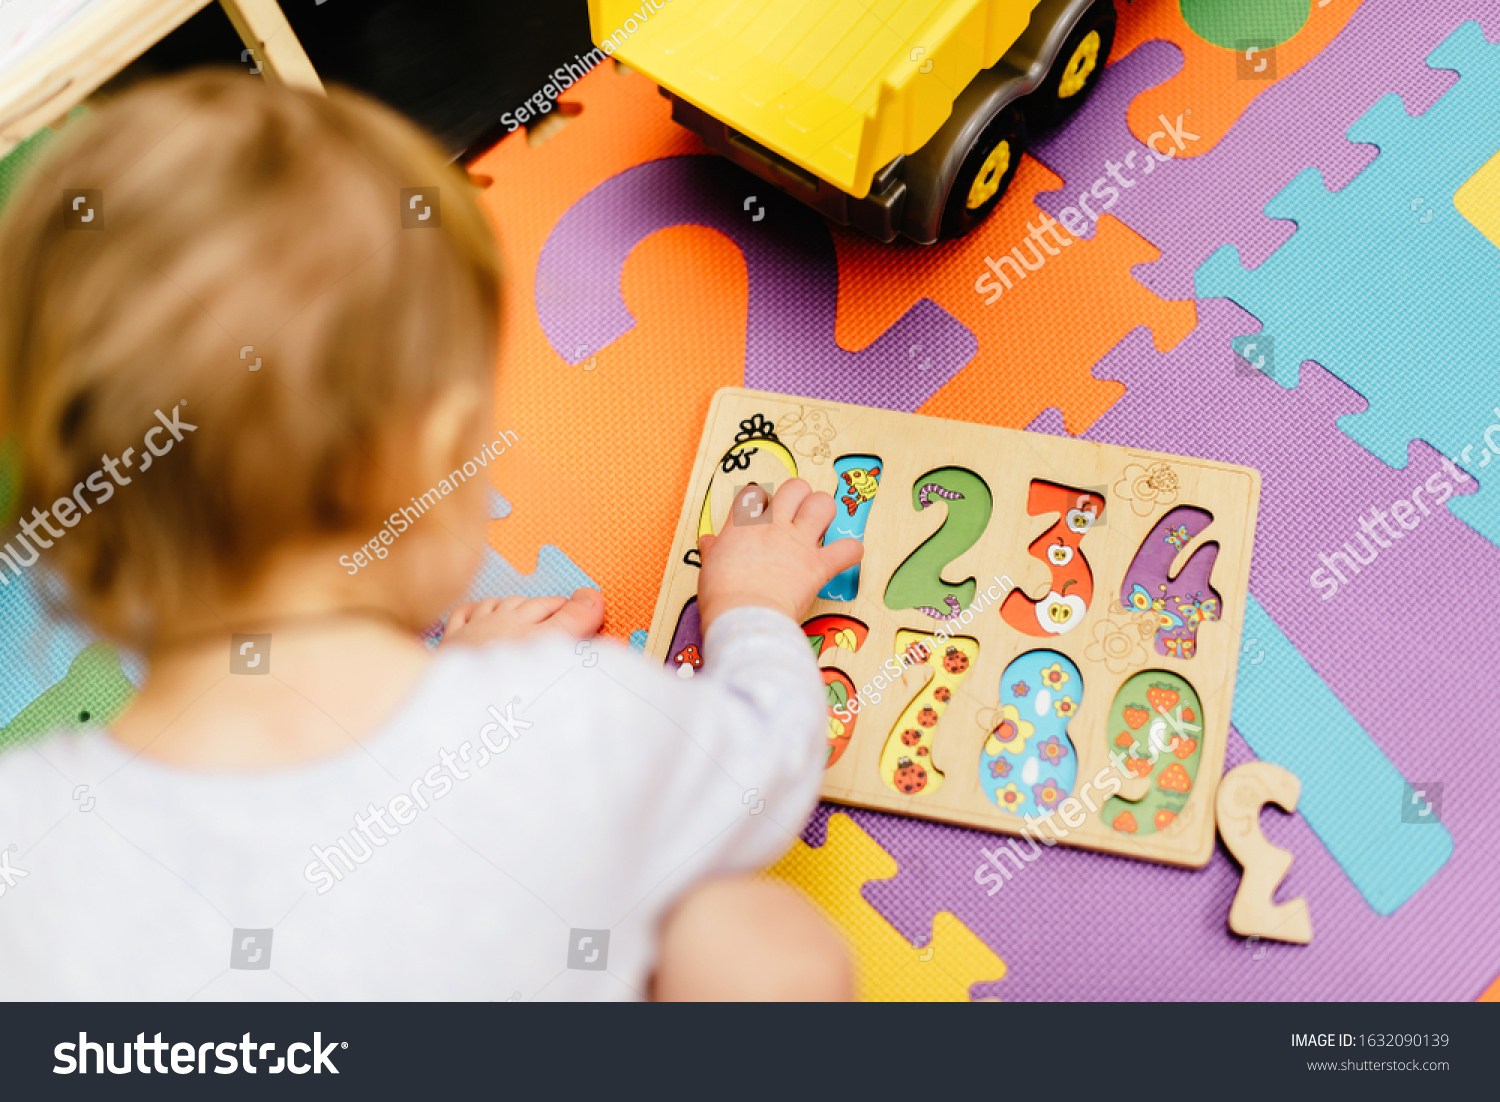 child on the carpet collects a puzzle of numbers, learns to count and learns numbers. Concept of learning by playing for toddler development #1632090139